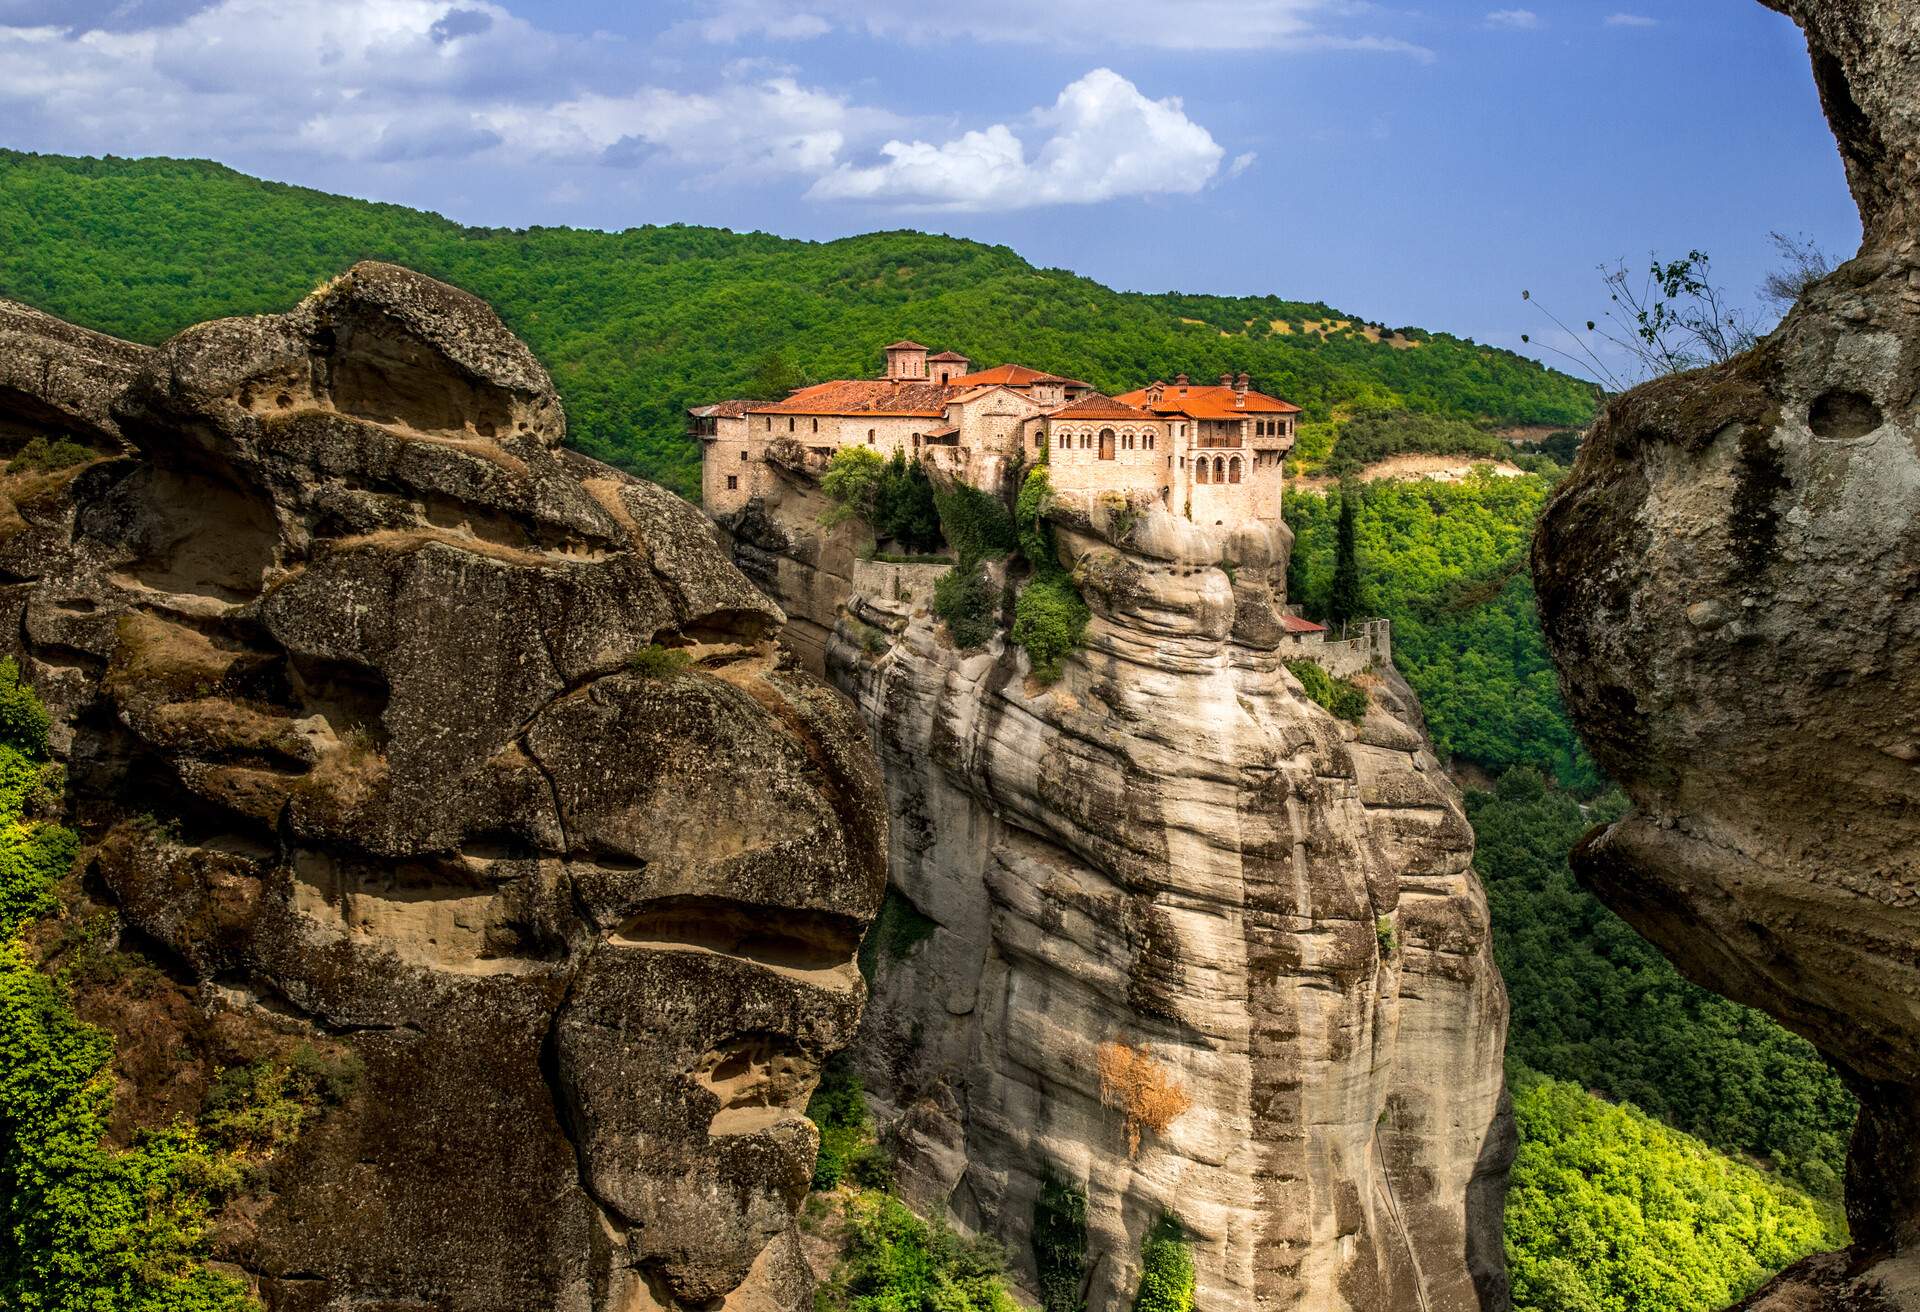 DEST_GREECE_THESSALY_KALABAKA_THE METEORA MONASTERY_GettyImages-987901972